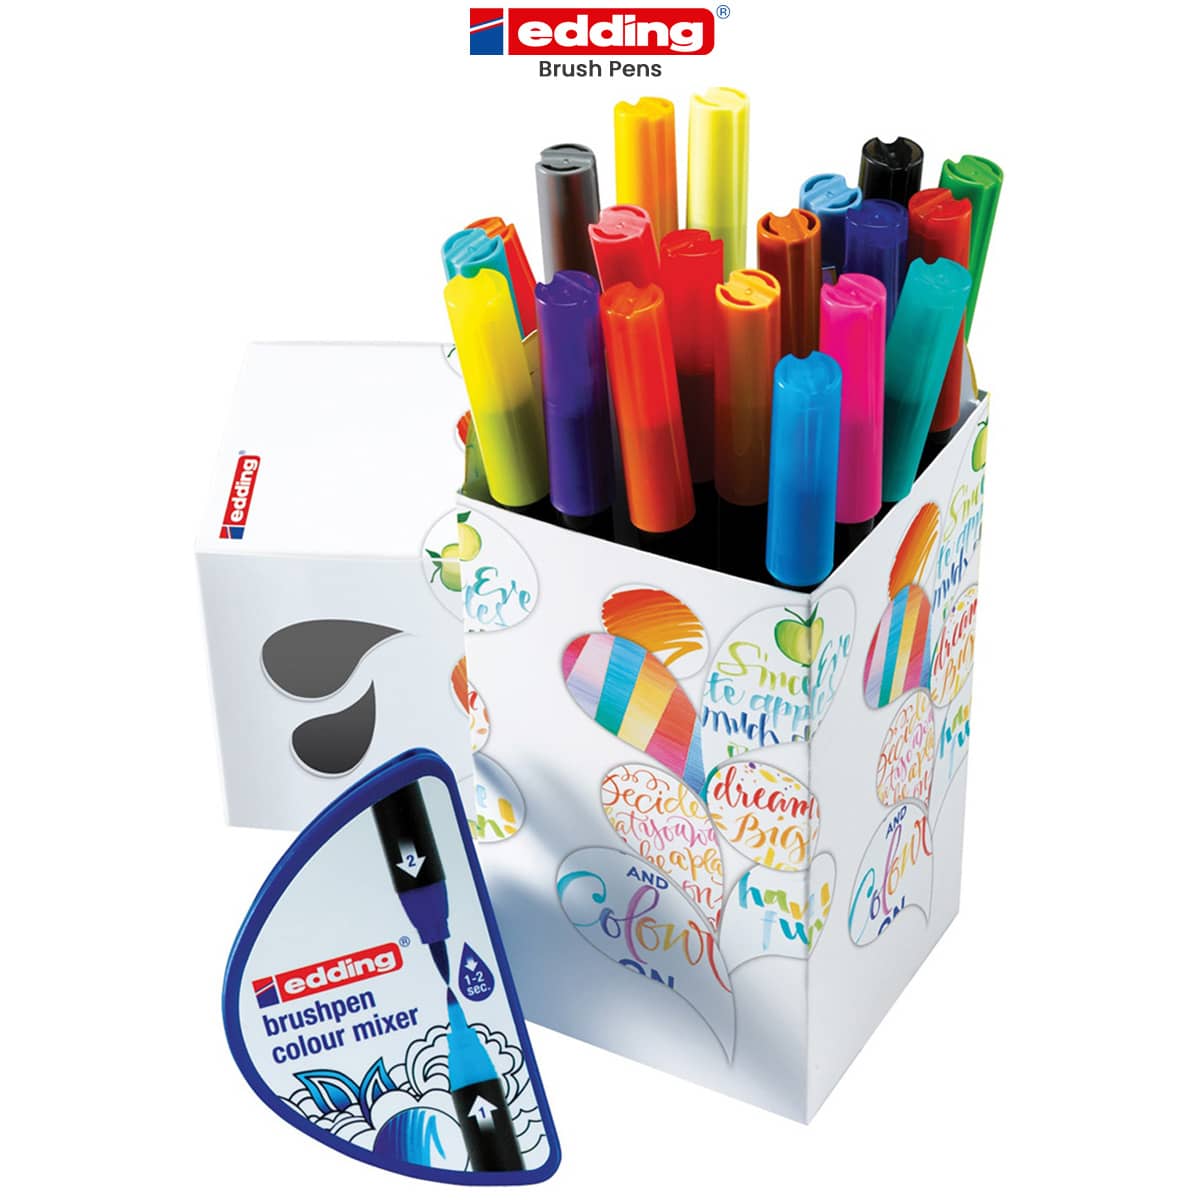 ETCHR Professional Colorful Drawing Pens - 16 Colorful Pens for Use as  Drawing and Calligraphy Pens - Quality Waterproof and Fadeproof Colorful  Artist